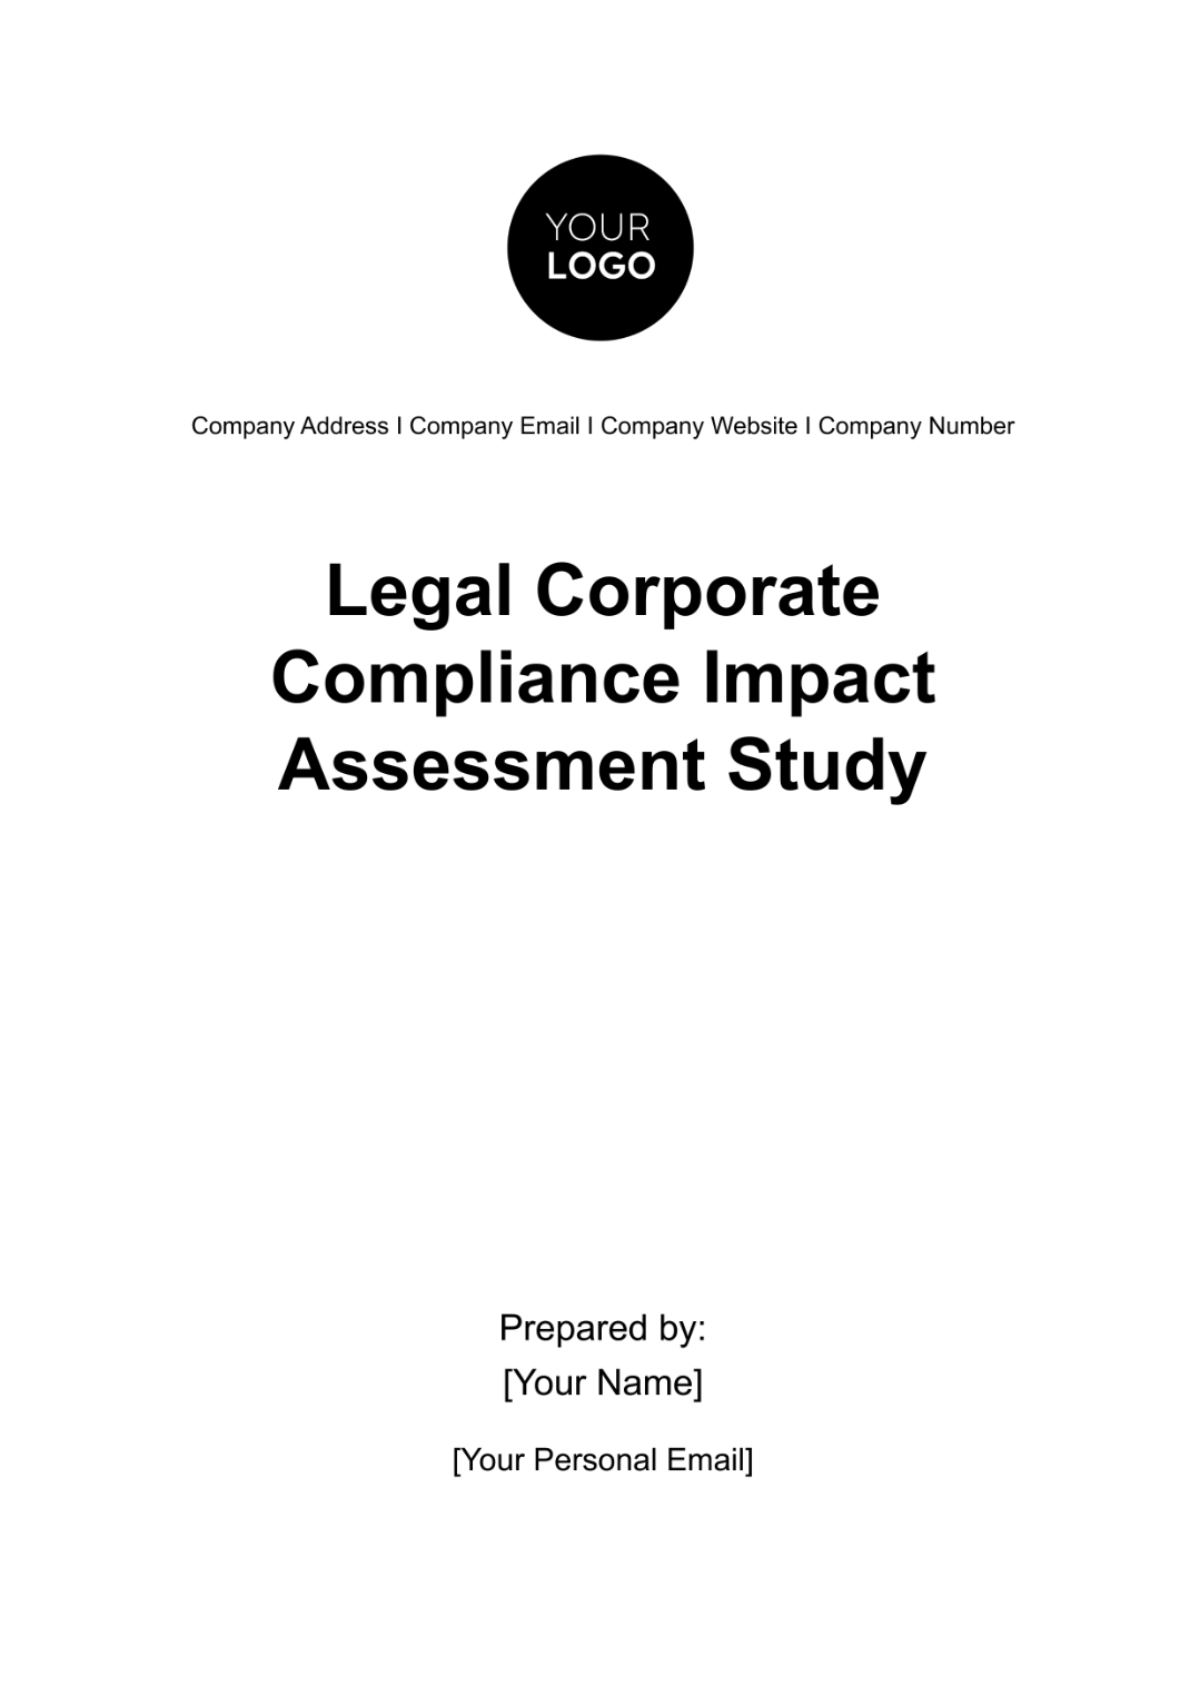 Legal Corporate Compliance Impact Assessment Study Template